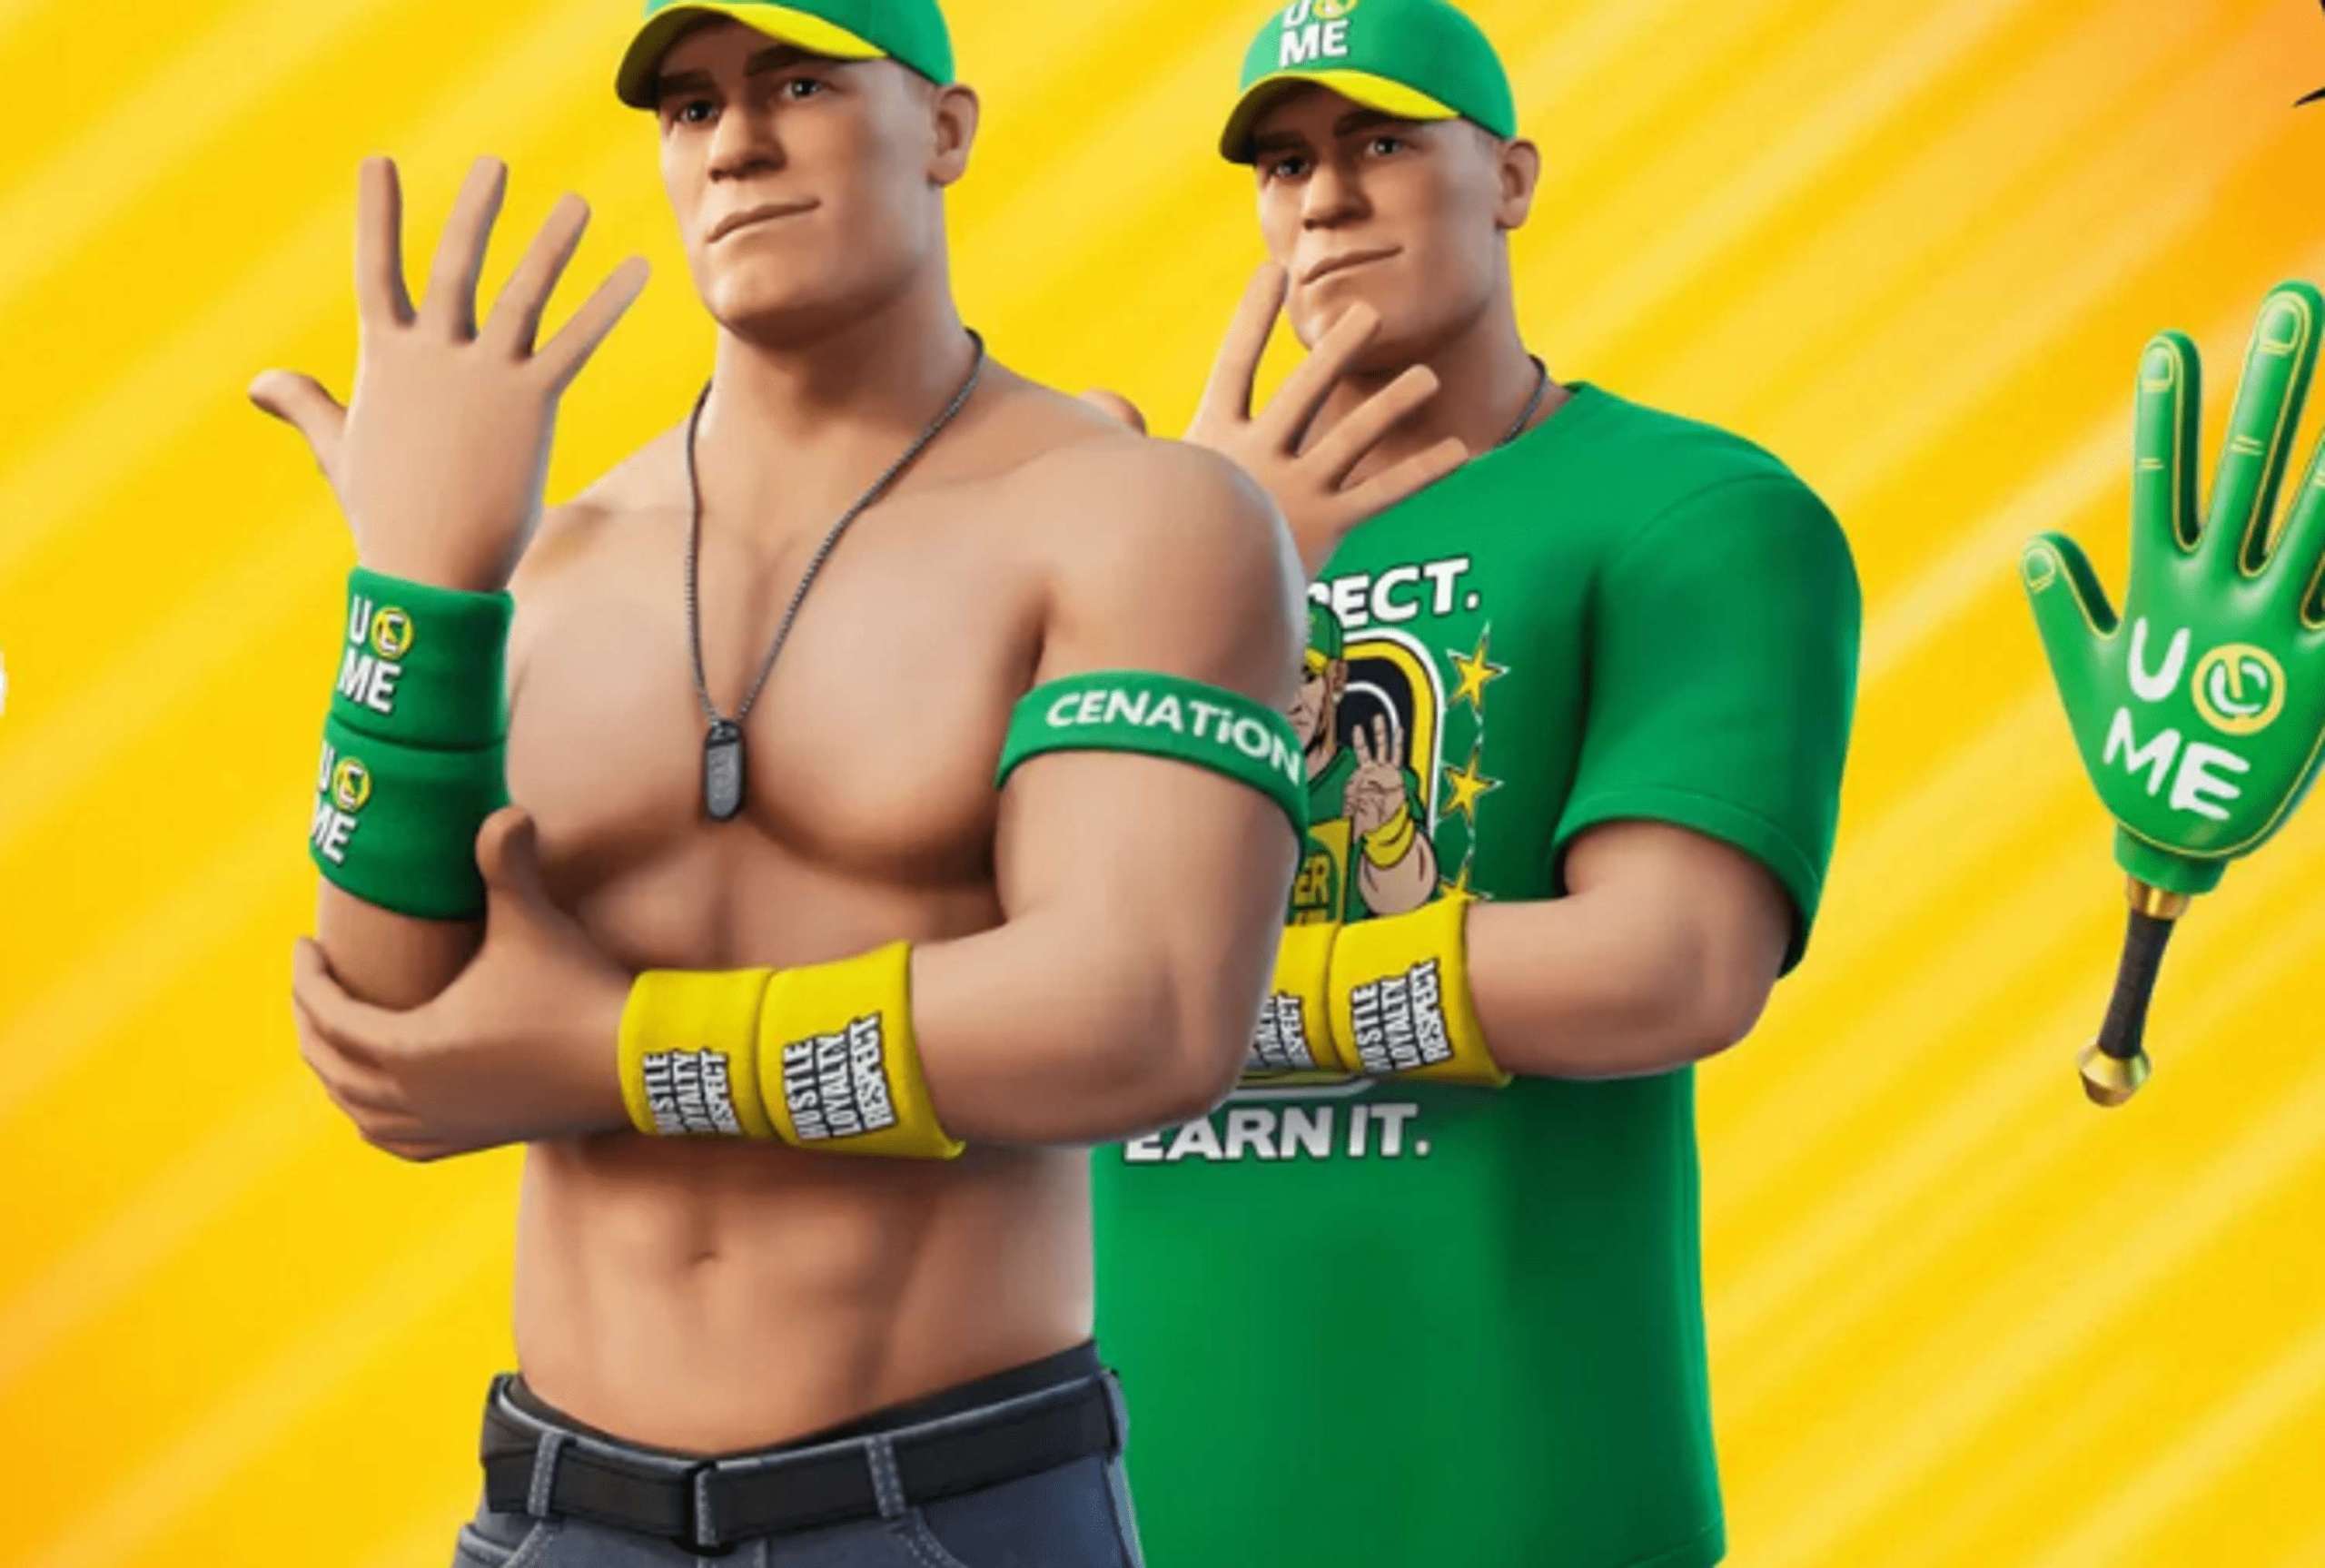 The Wrestler And Actor John Cena Will Now Feature In Fortnite, According To Epic Games